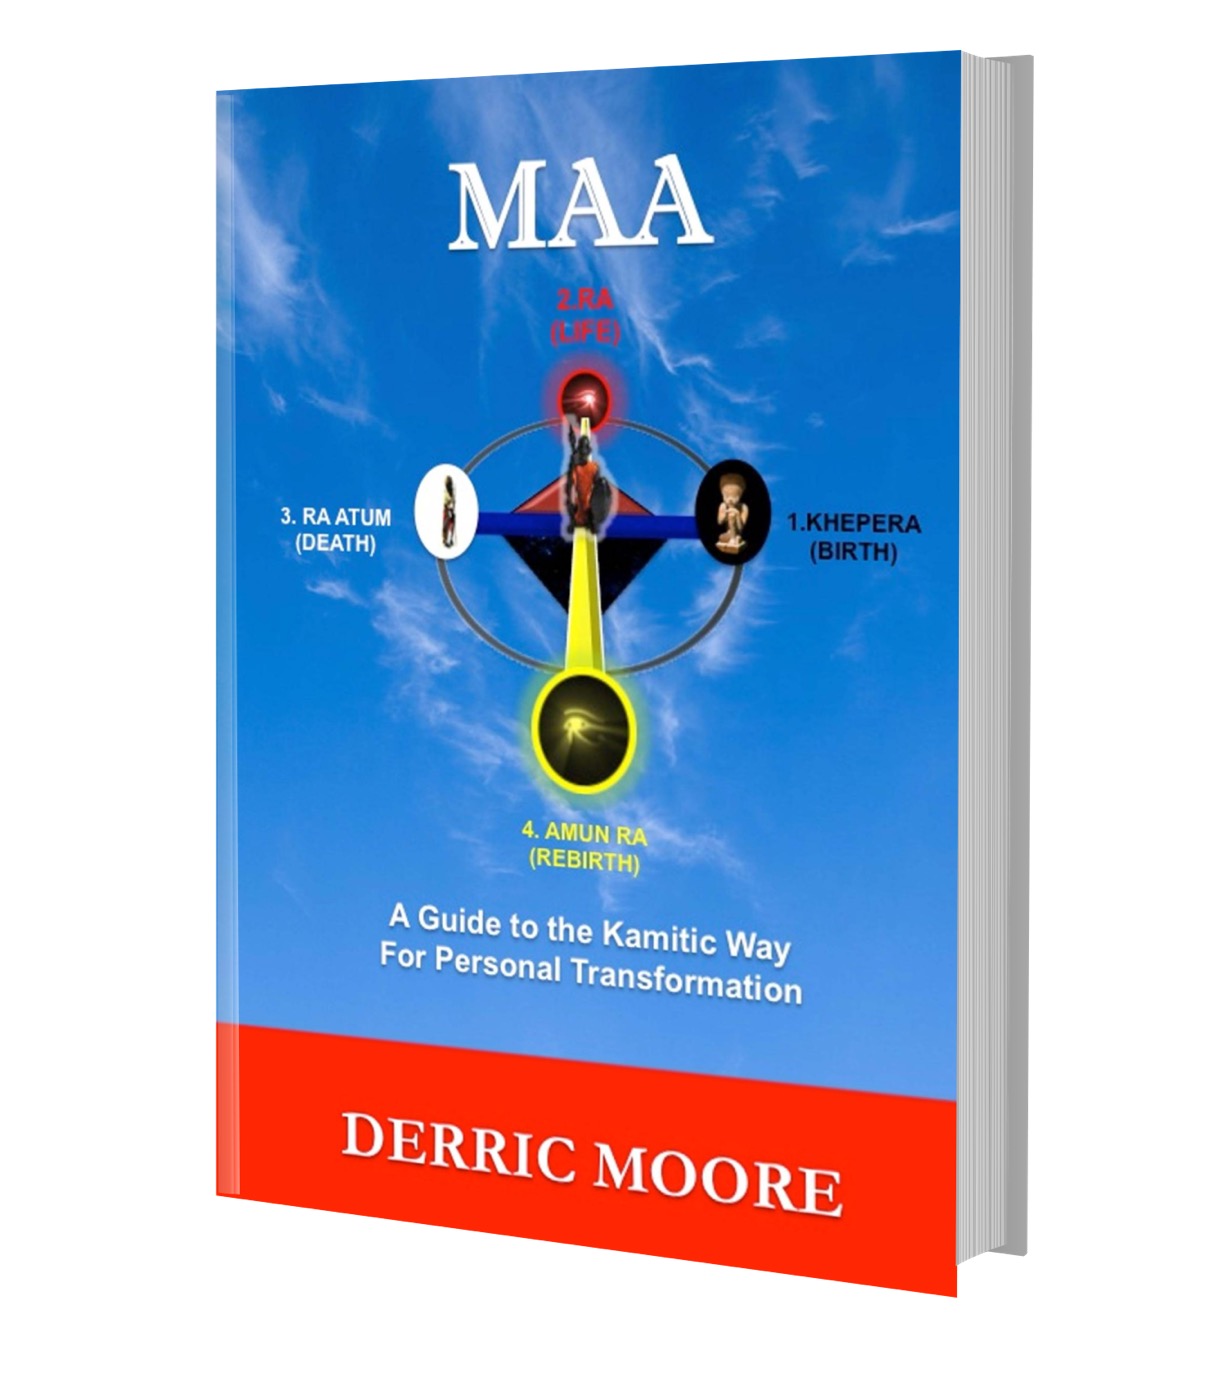 MAA: A Guide to the Kamitic Way for Personal Transformation